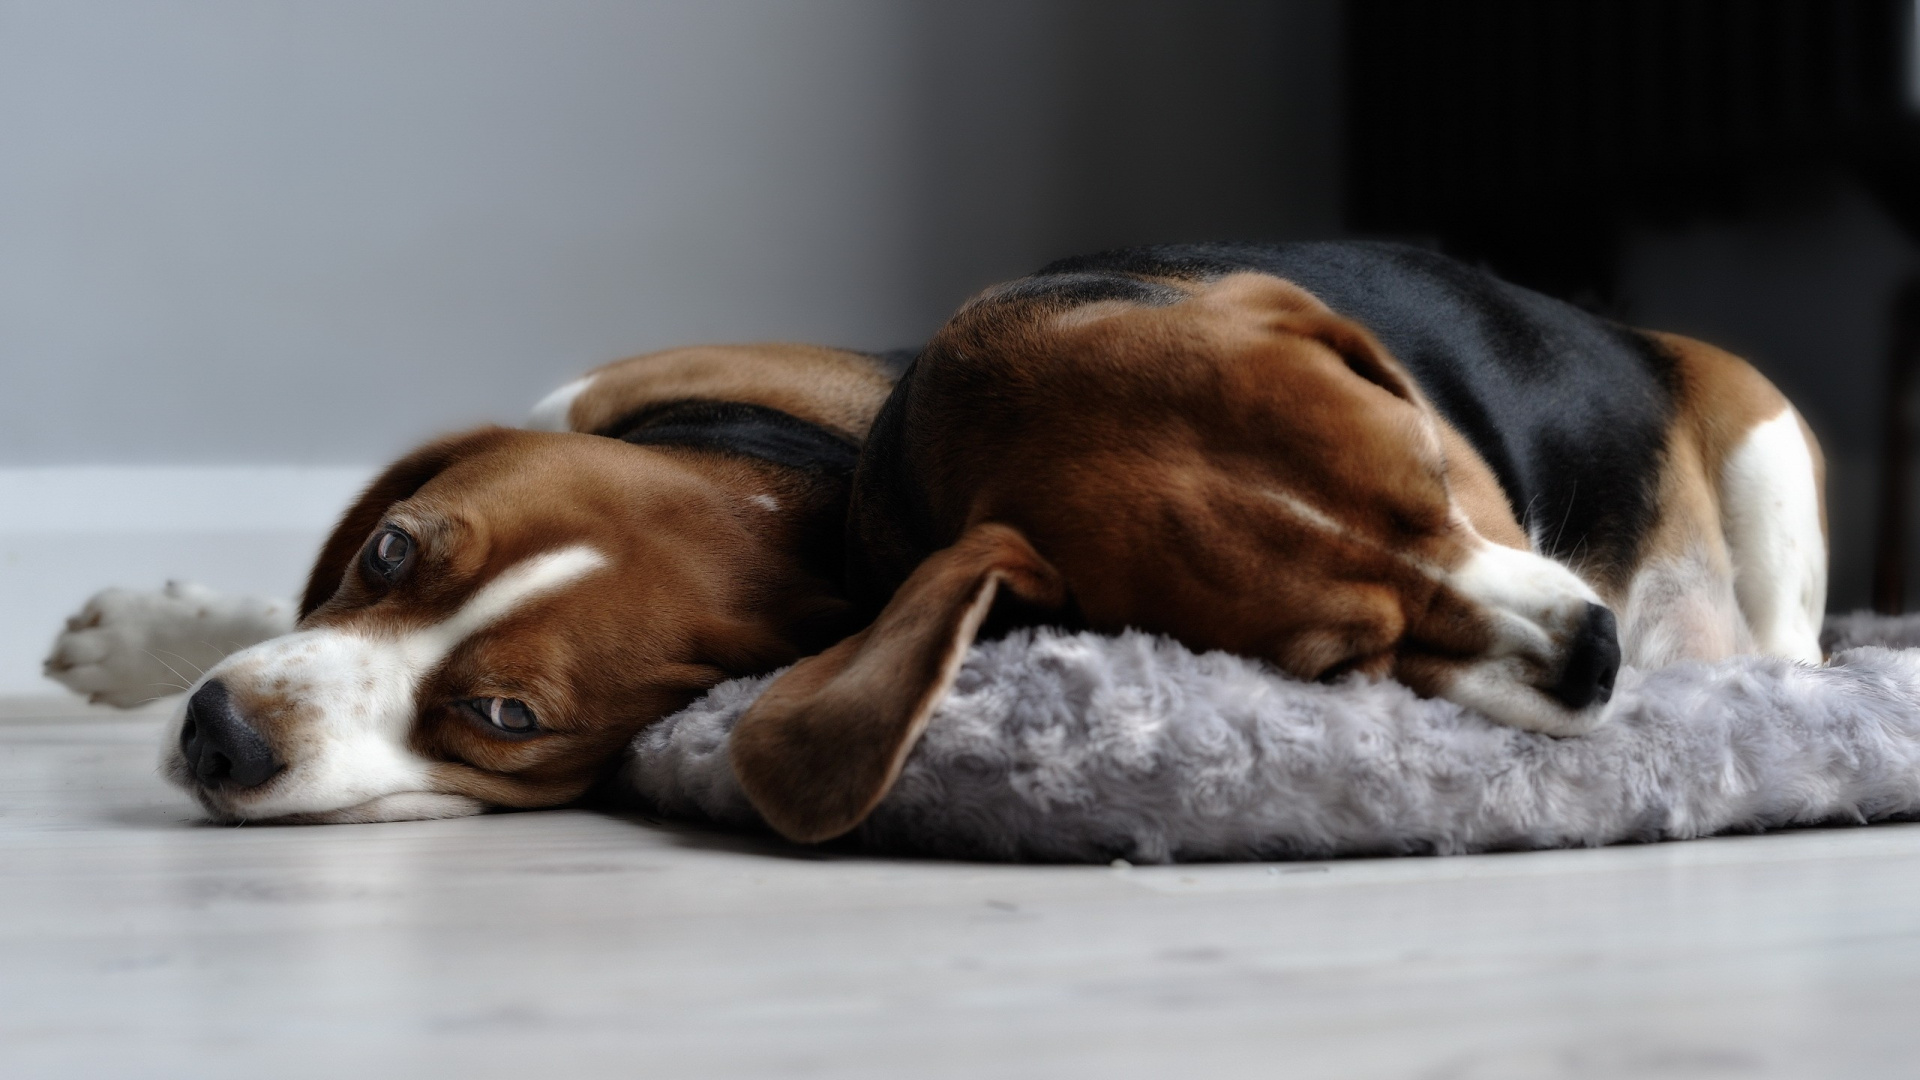 Brown and Black Short Coated Dog Lying on Gray Textile. Wallpaper in 1920x1080 Resolution